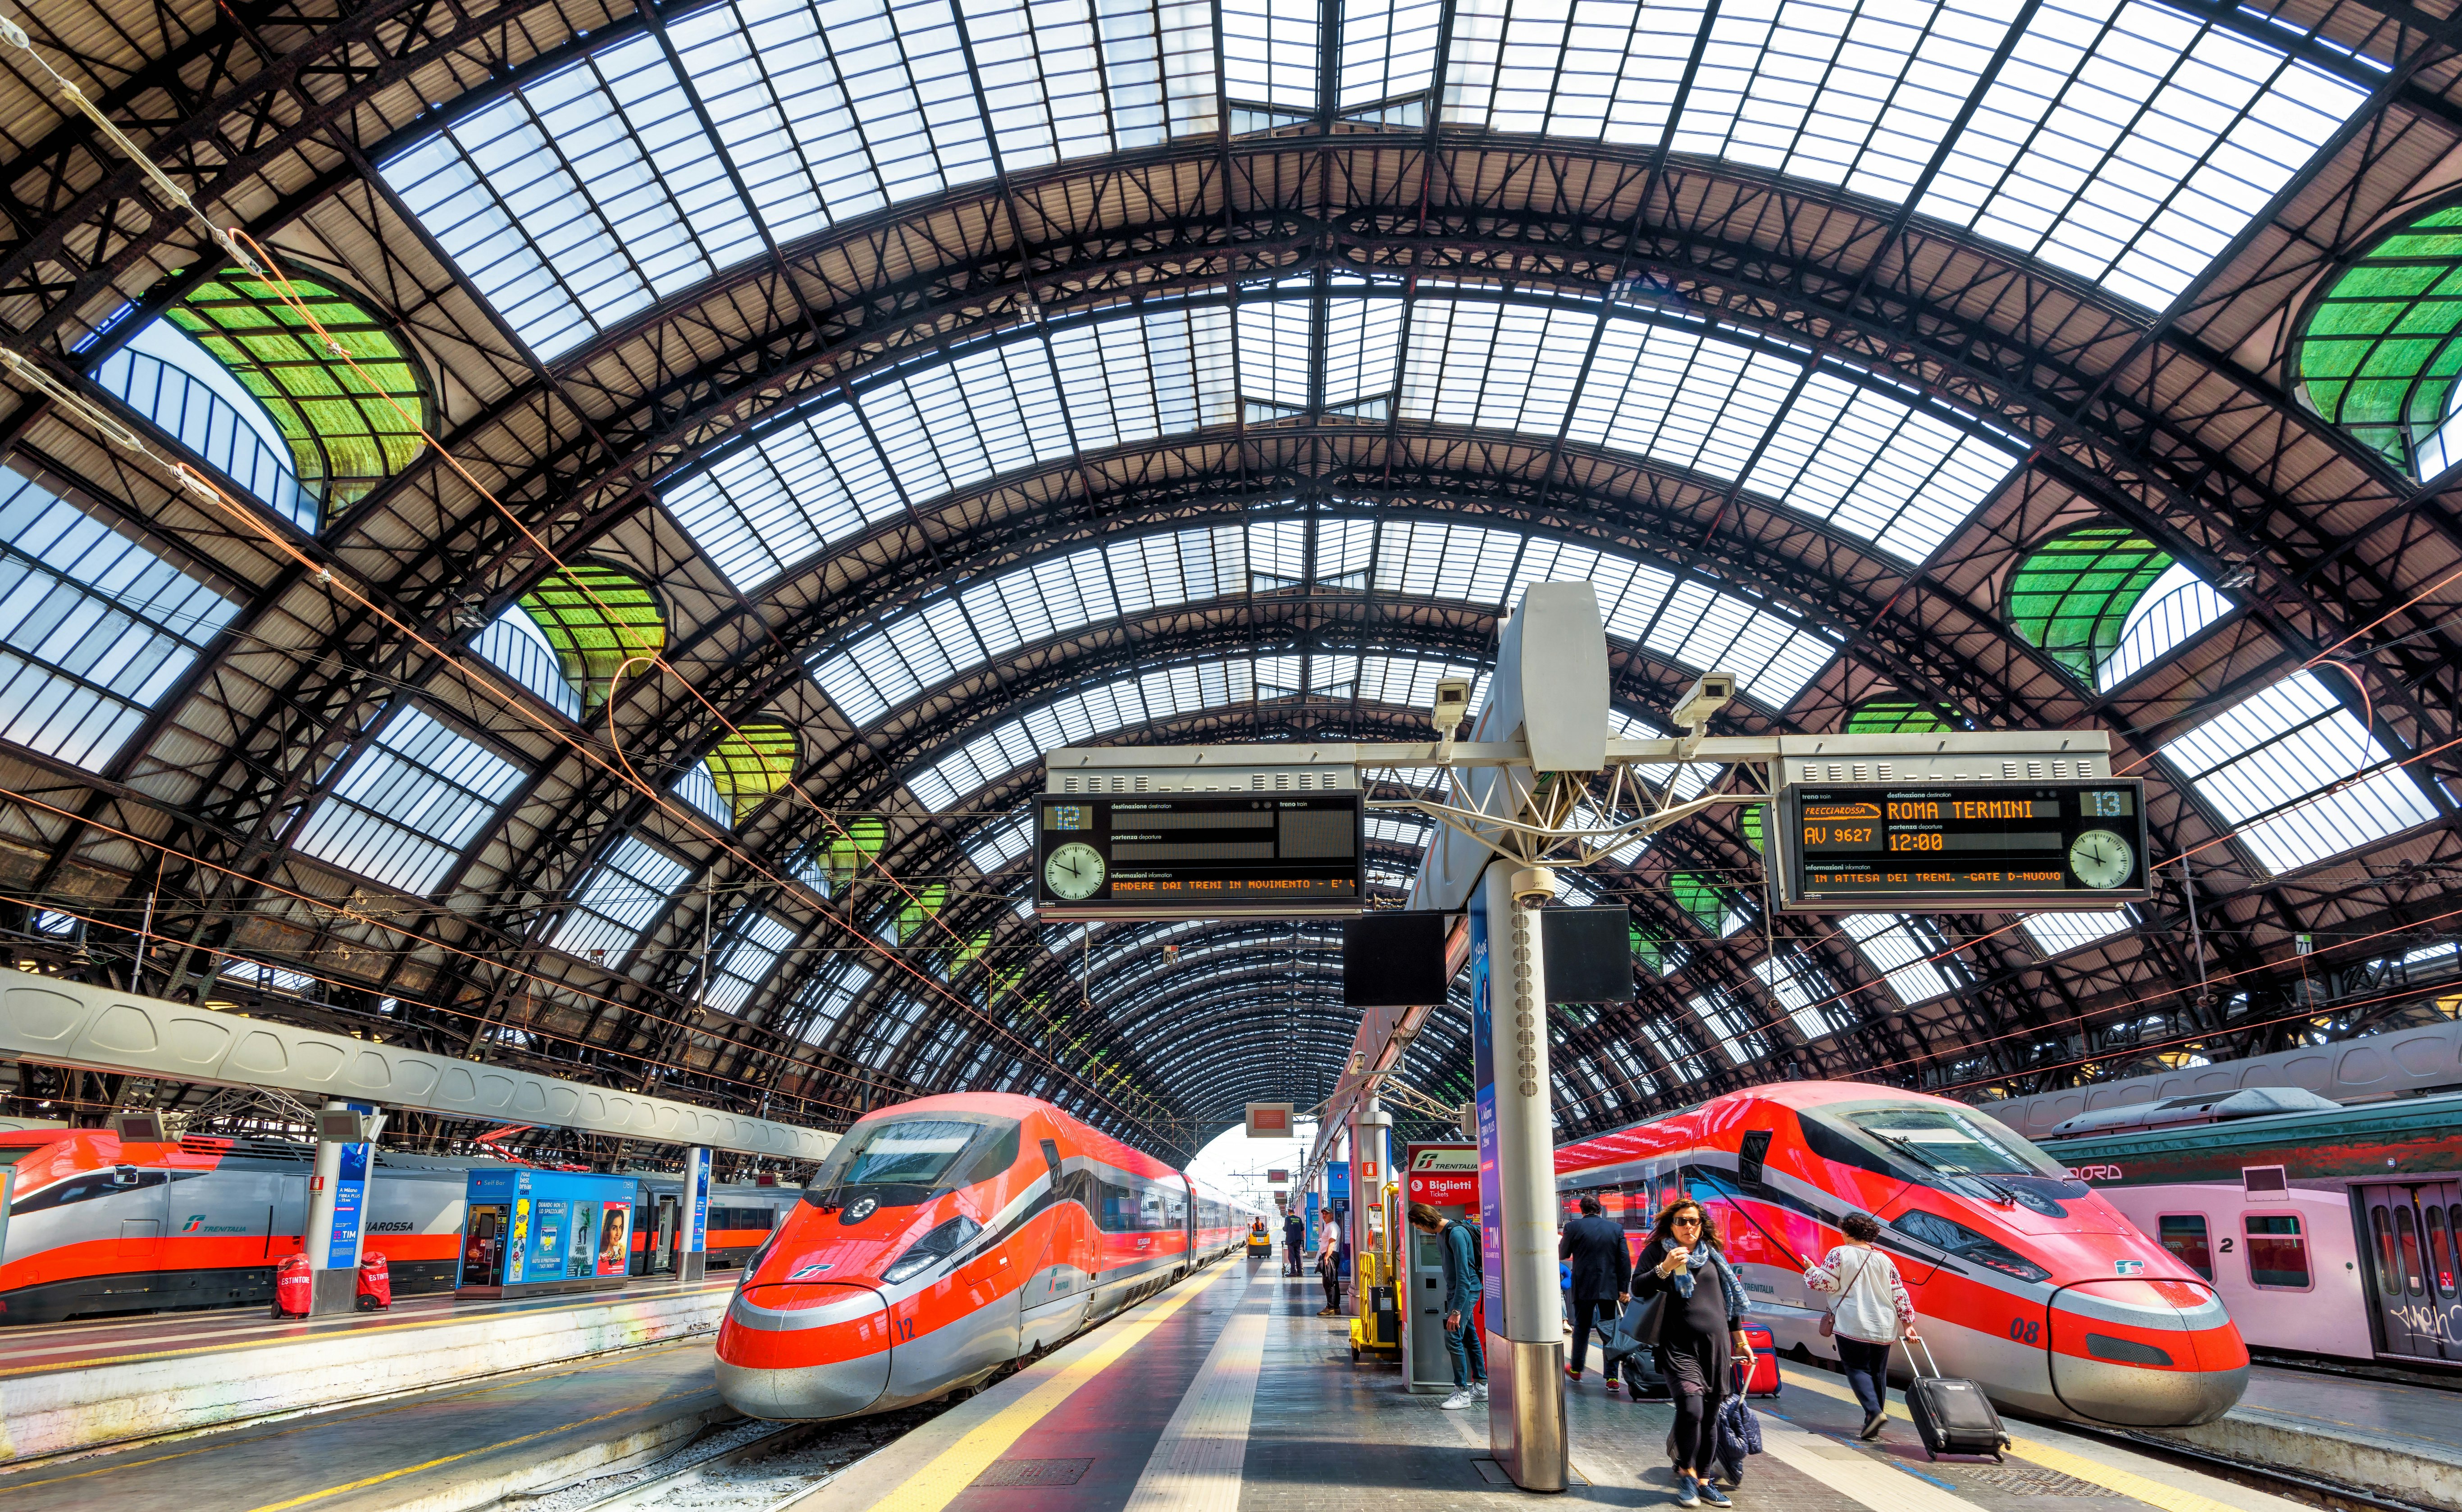 Modern high-speed trains at the railway Milan Central Station. The sleek, red and blue trains sit beneath a domed glass ceiling that has see-through panes with green accents. 